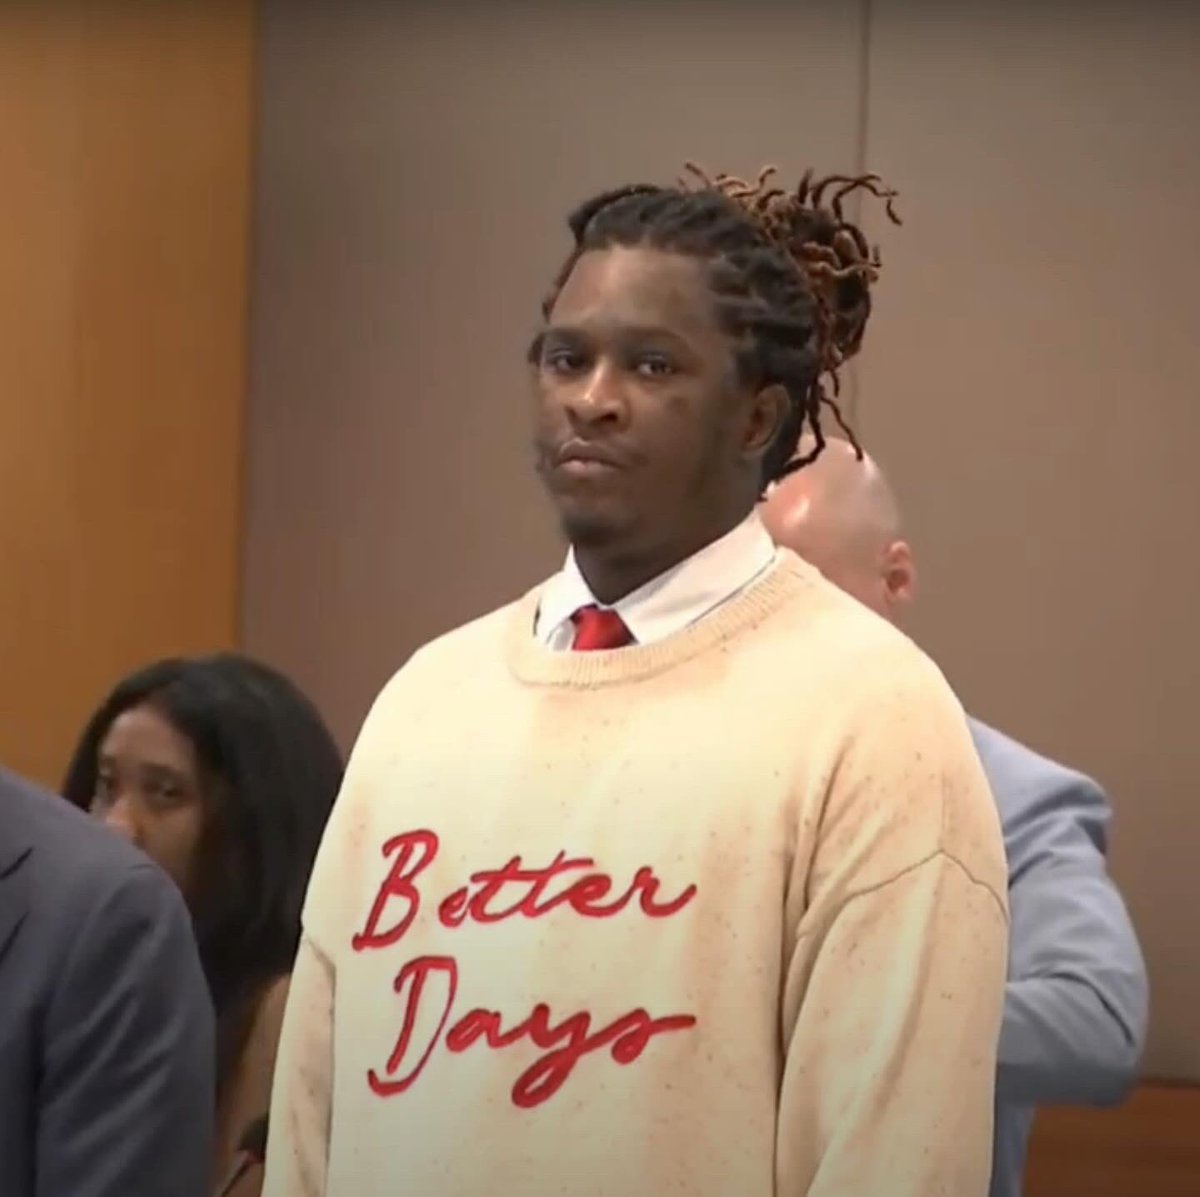 Young Thug rocking Better Days in court ❤️ @ThuggerDaily